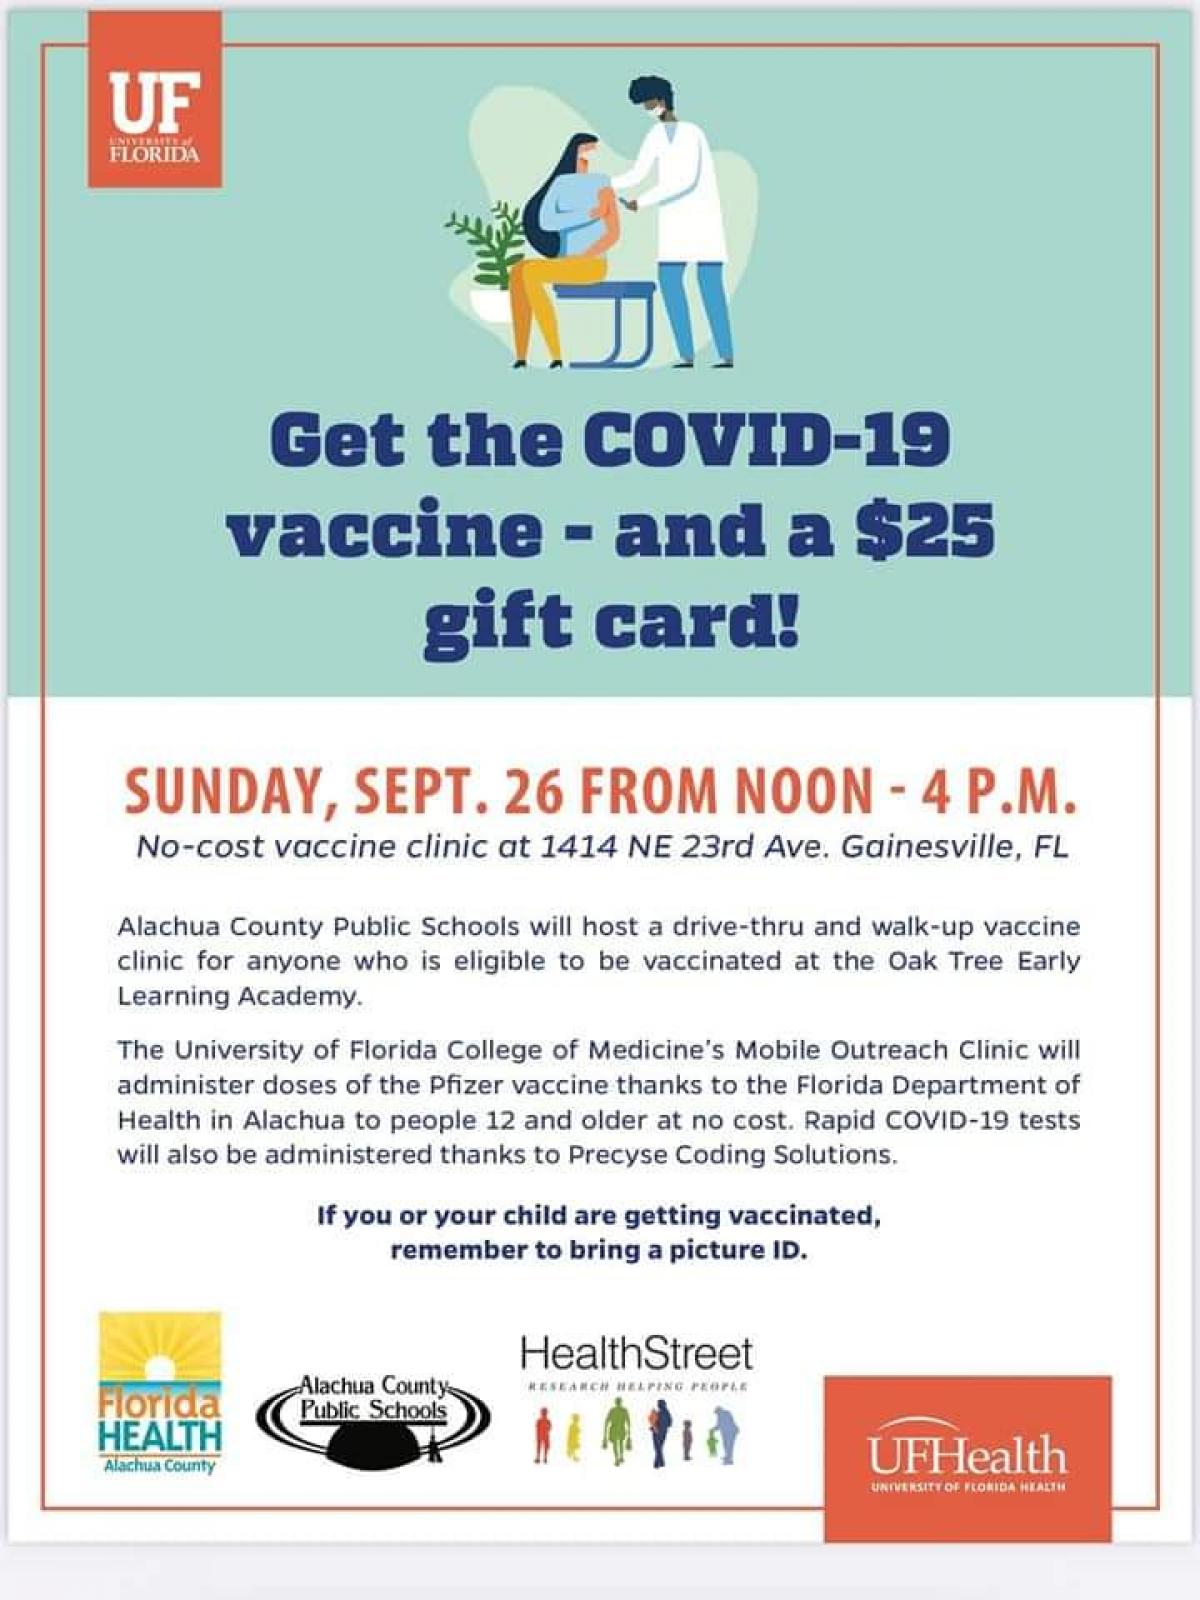 Get the COVID-19 vaccine - and a $25 gift card!